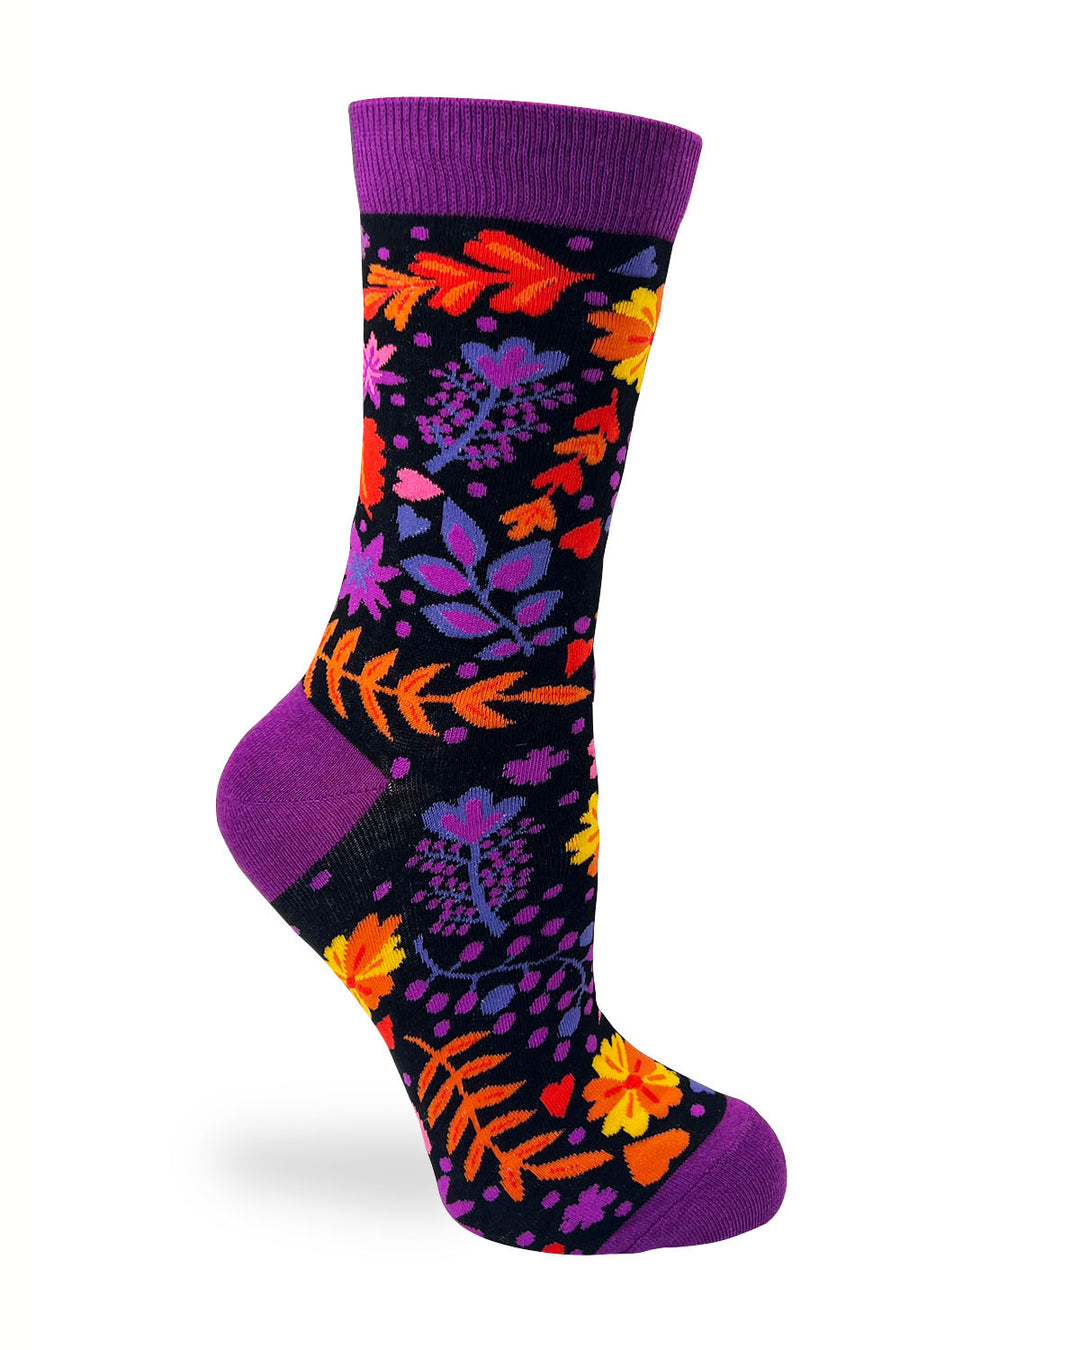 Ladies' crew socks feature vibrant, bright, happy, and rich autumn colors.